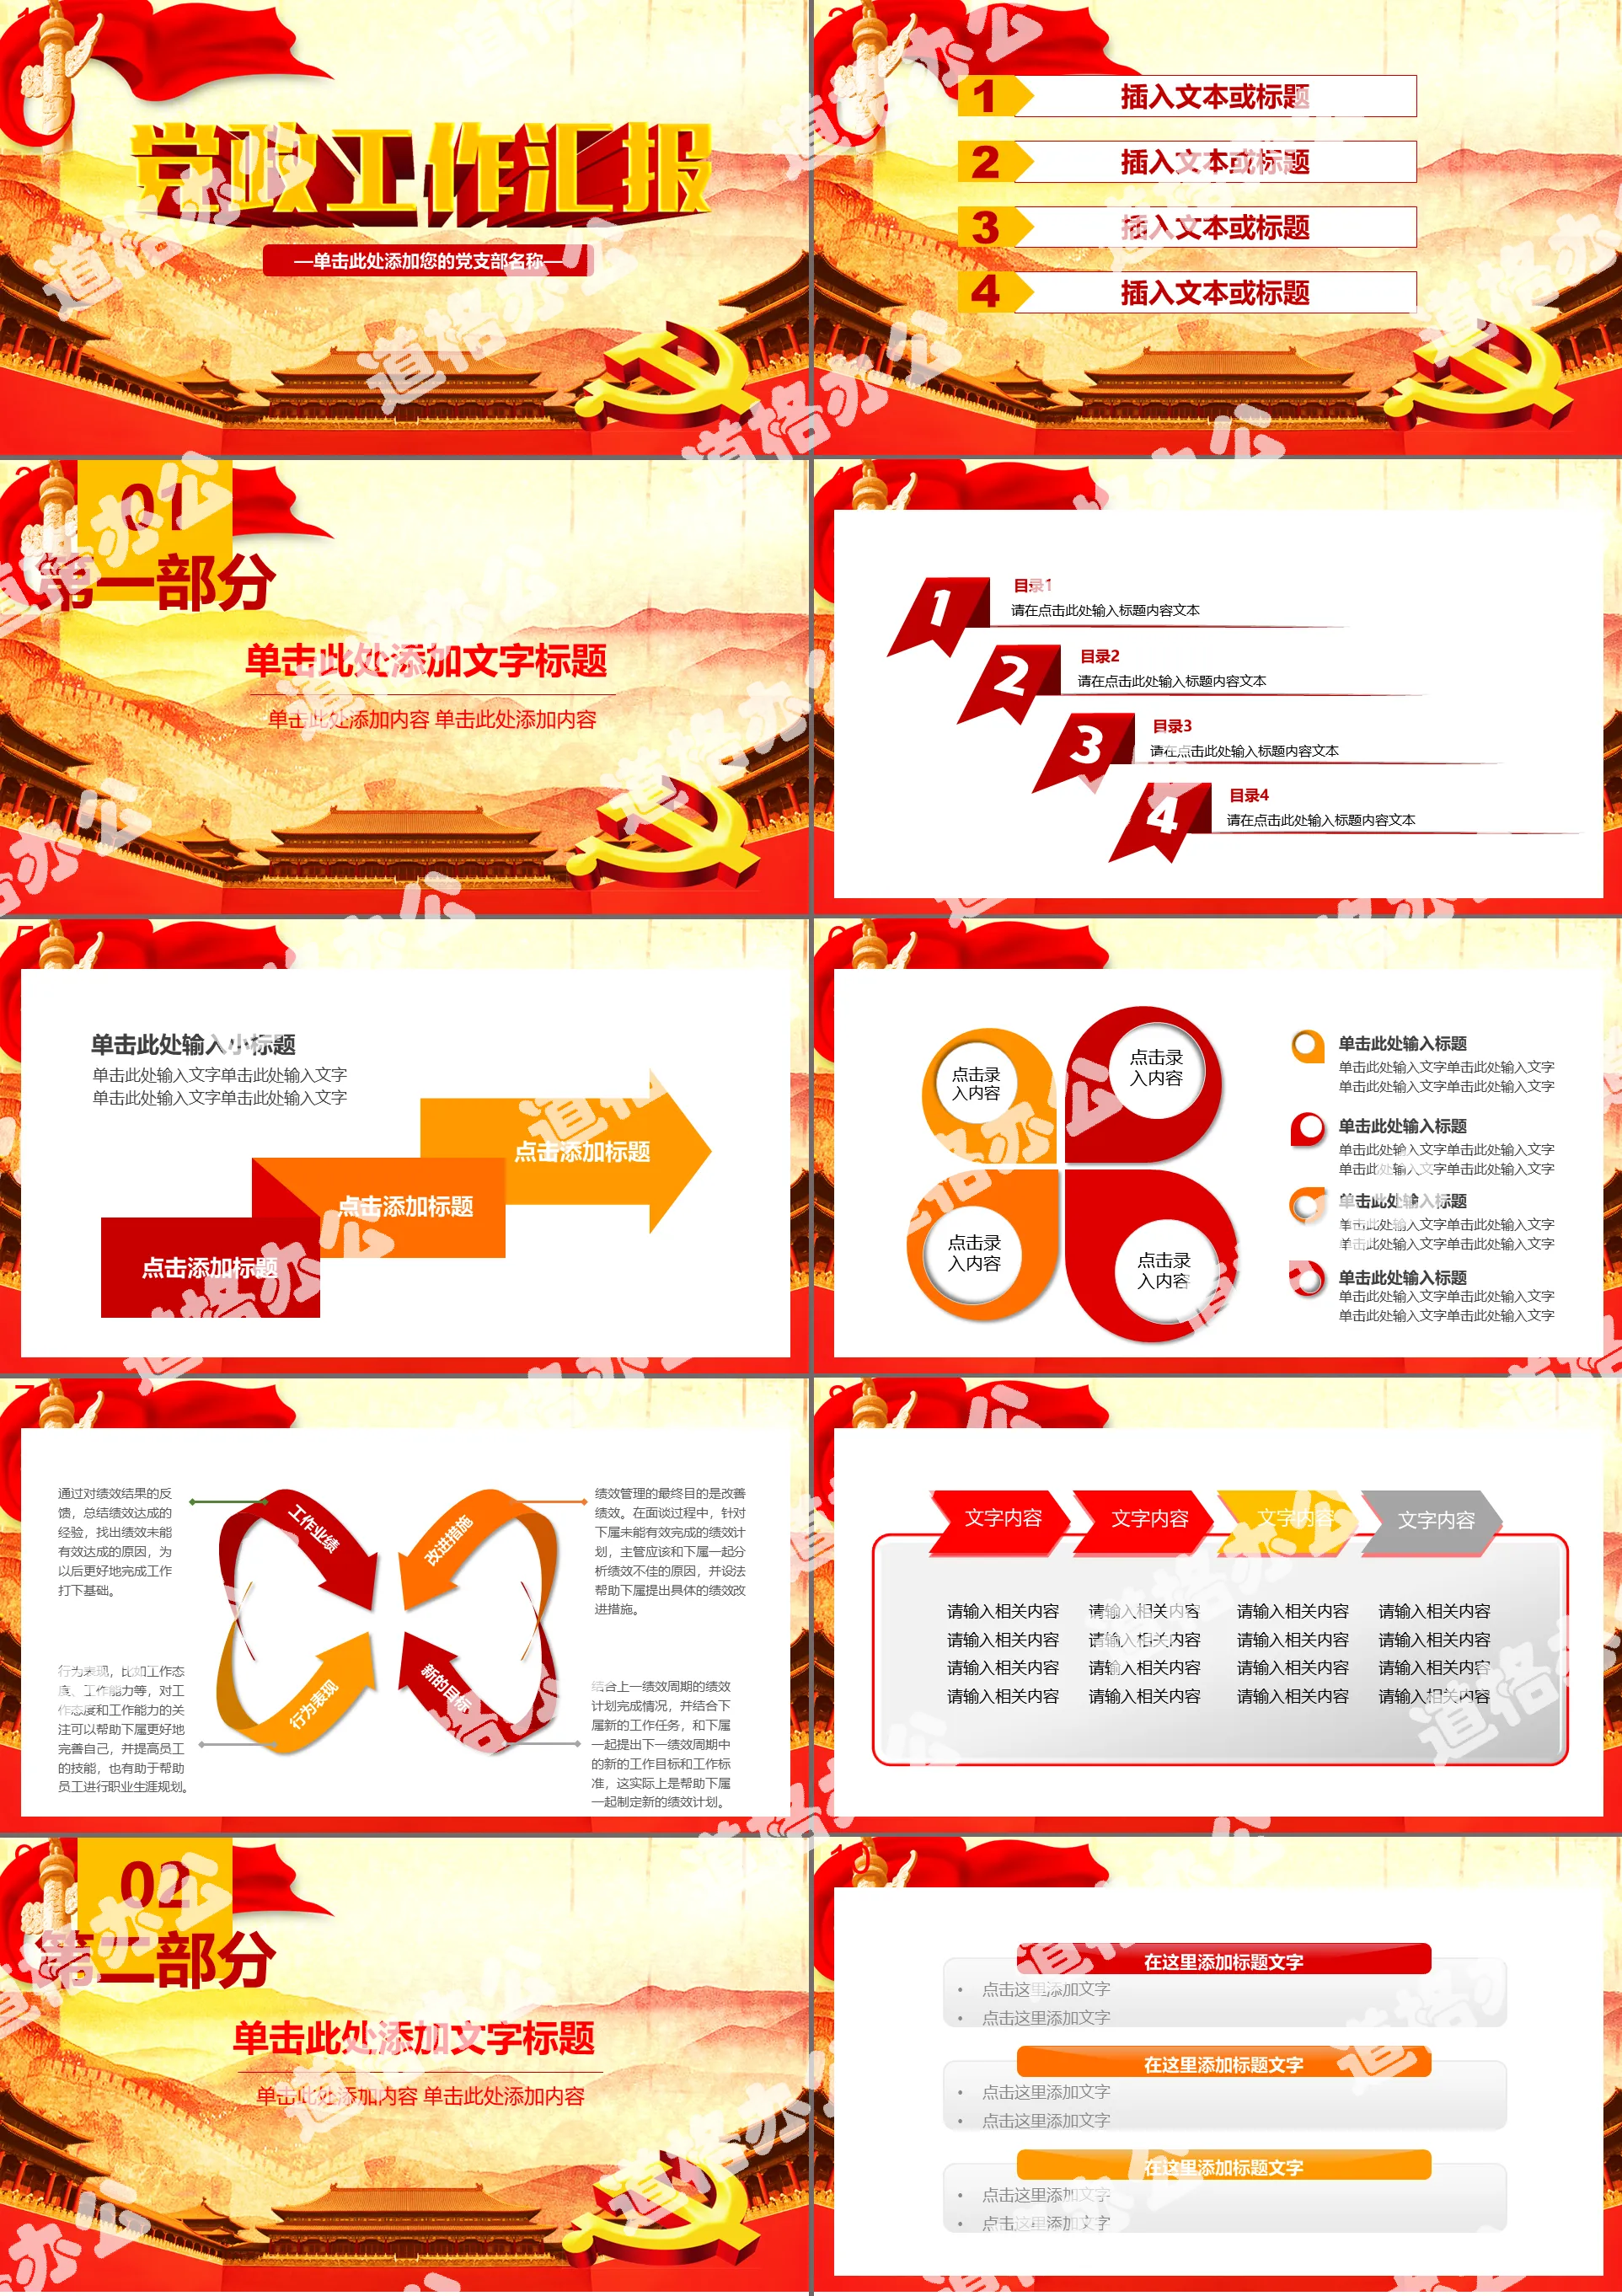 Party and government party building work report PPT template with the background of the ancient building Great Wall Huabiao